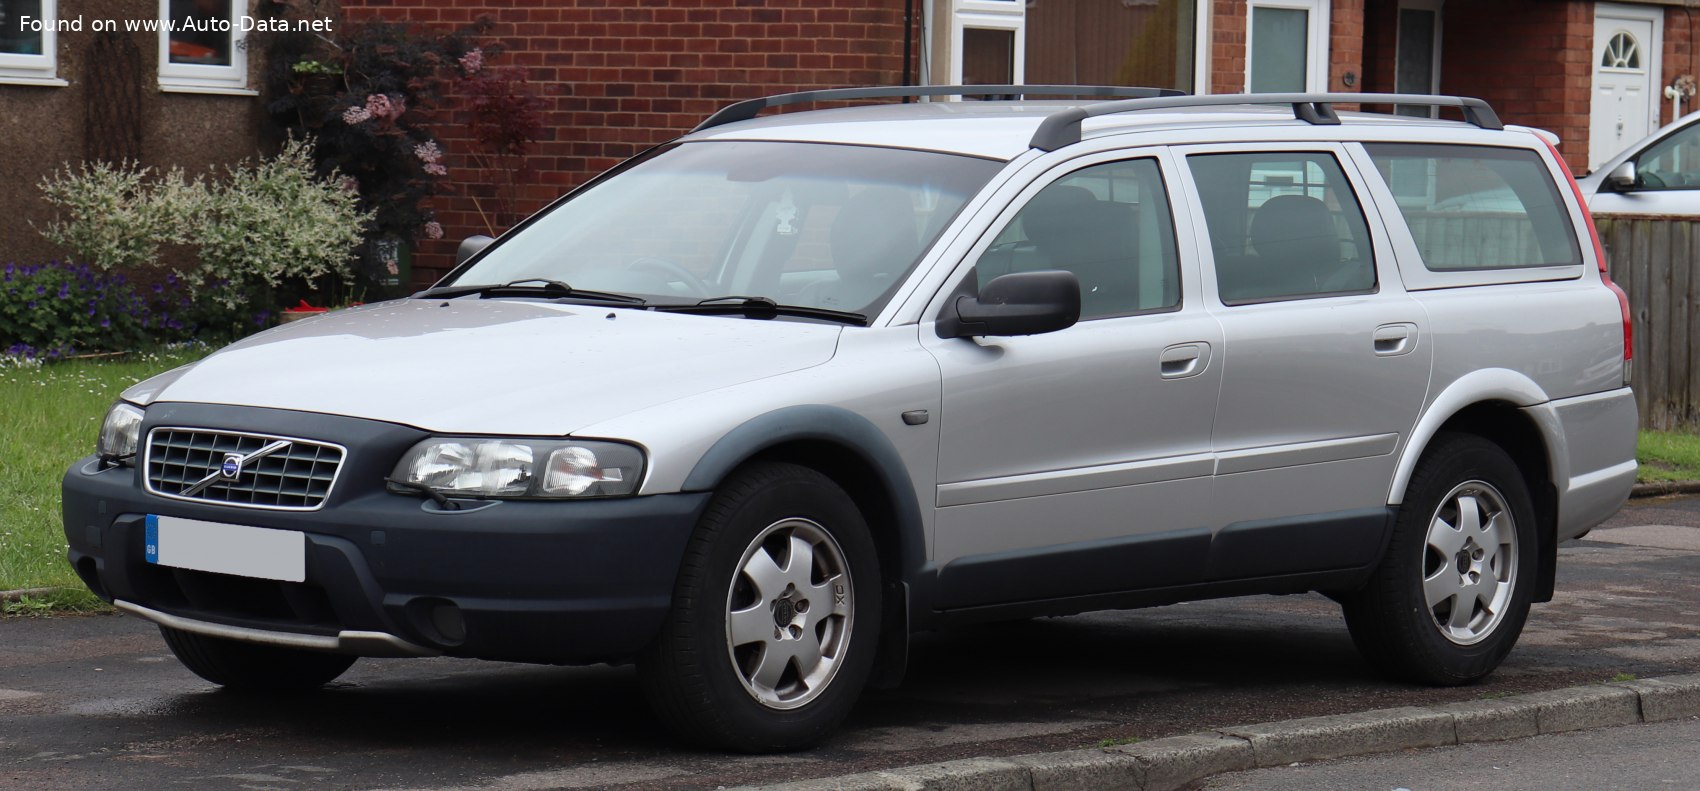 2000 Volvo XC70 II 2.4 T (200 PS) AWD Automatic